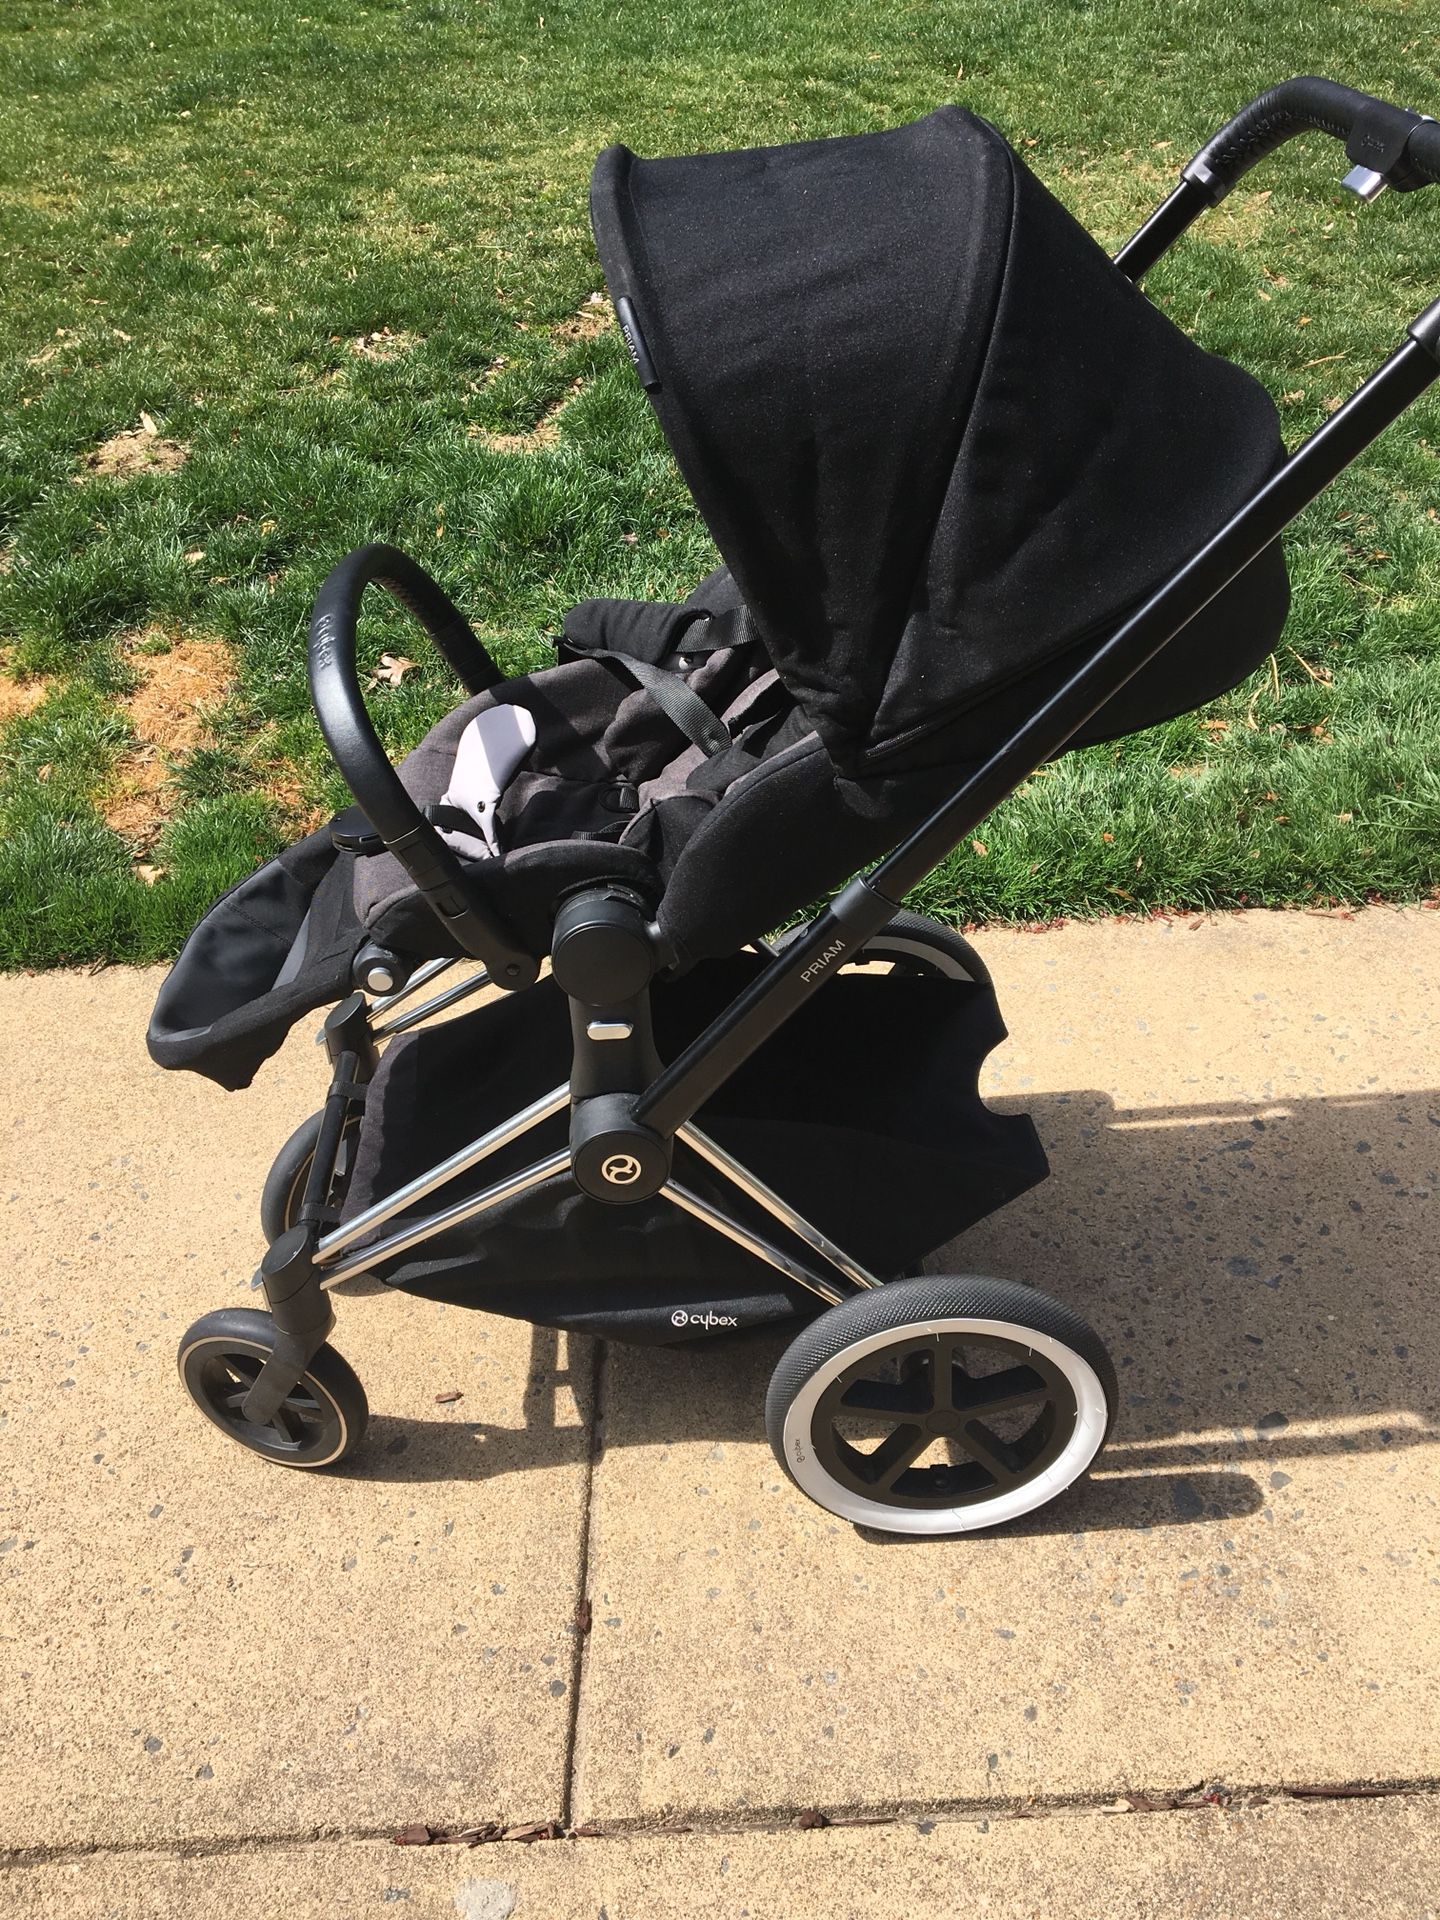 Cybex All Terrain Stroller, Car Seat with 2 bases!